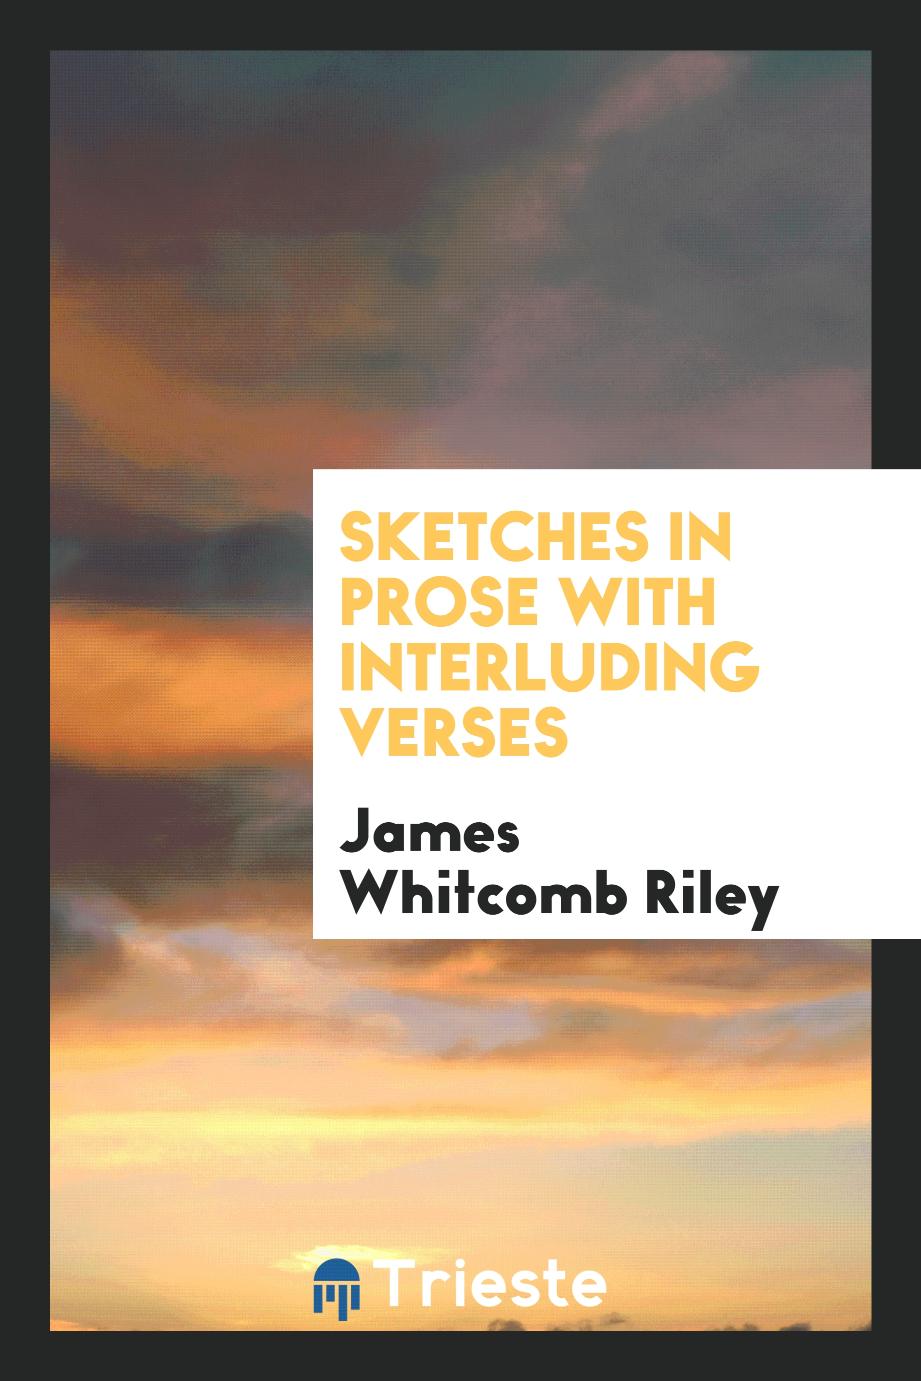 Sketches in prose with interluding verses